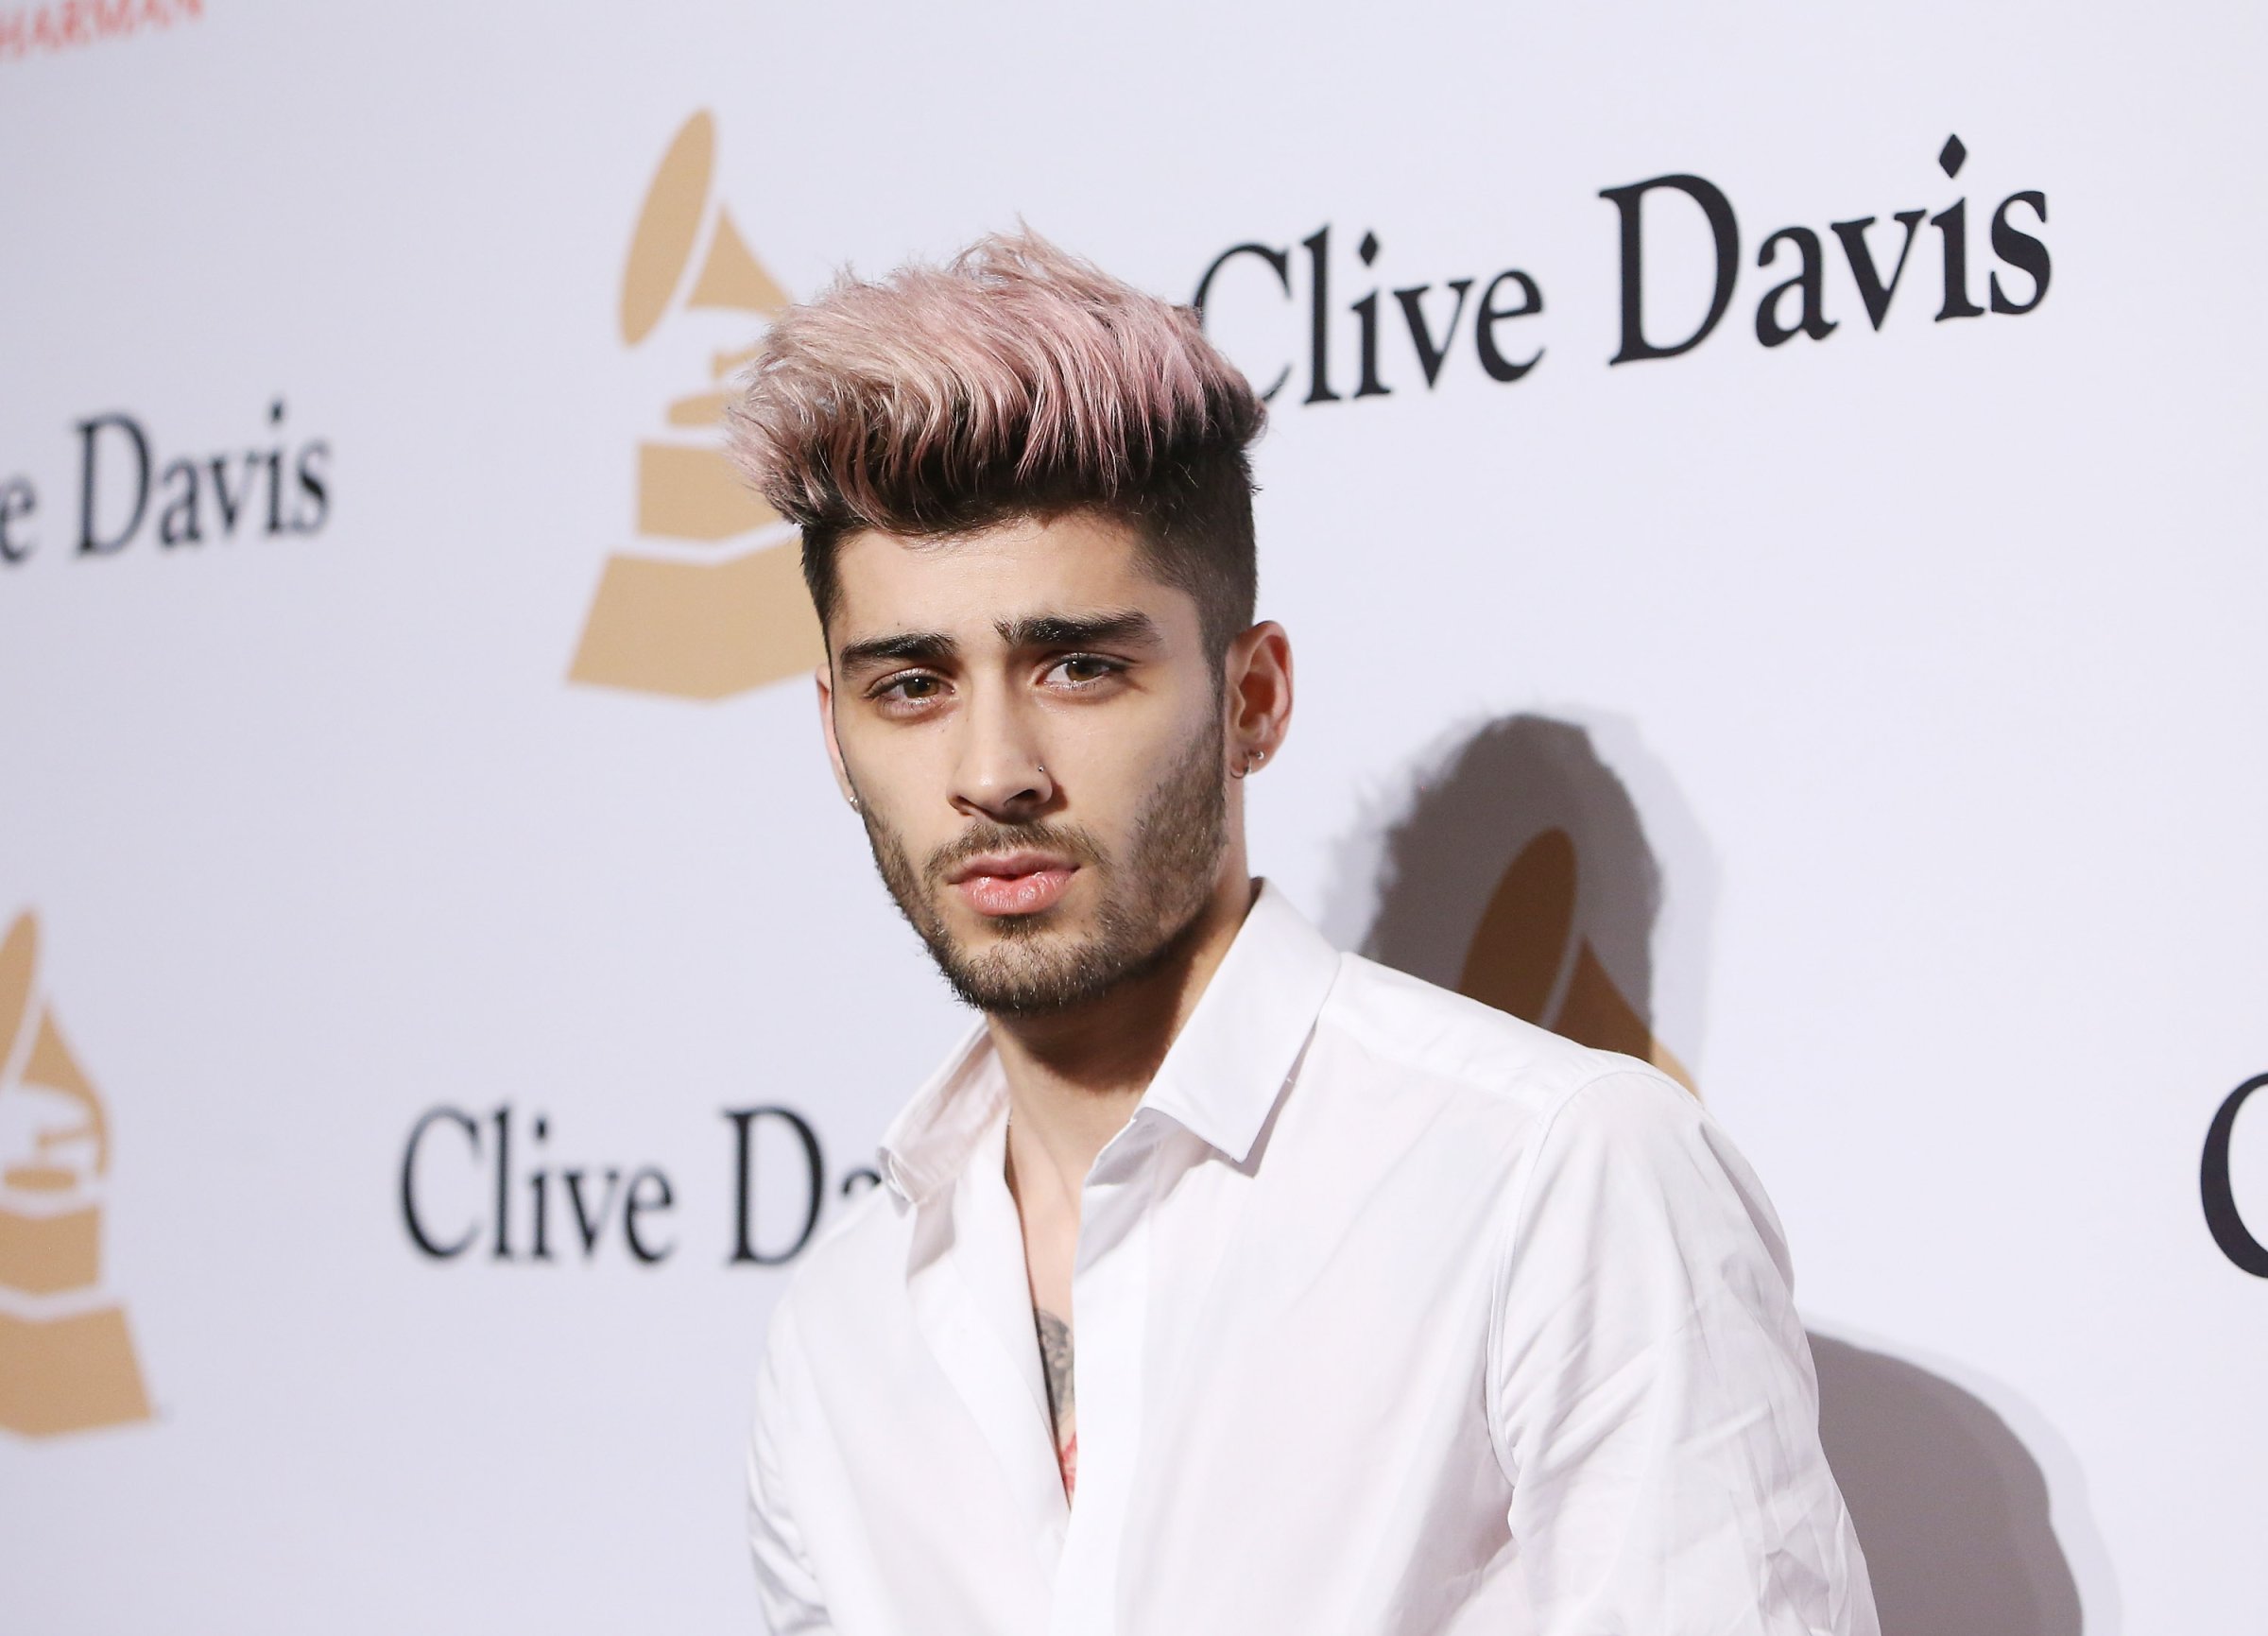 Zayn Malik arrives at the 2016 Pre-GRAMMY Gala and Salute to Industry Icons honoring Irving Azoff held at The Beverly Hilton Hotel on February 14, 2016 in Beverly Hills, California.